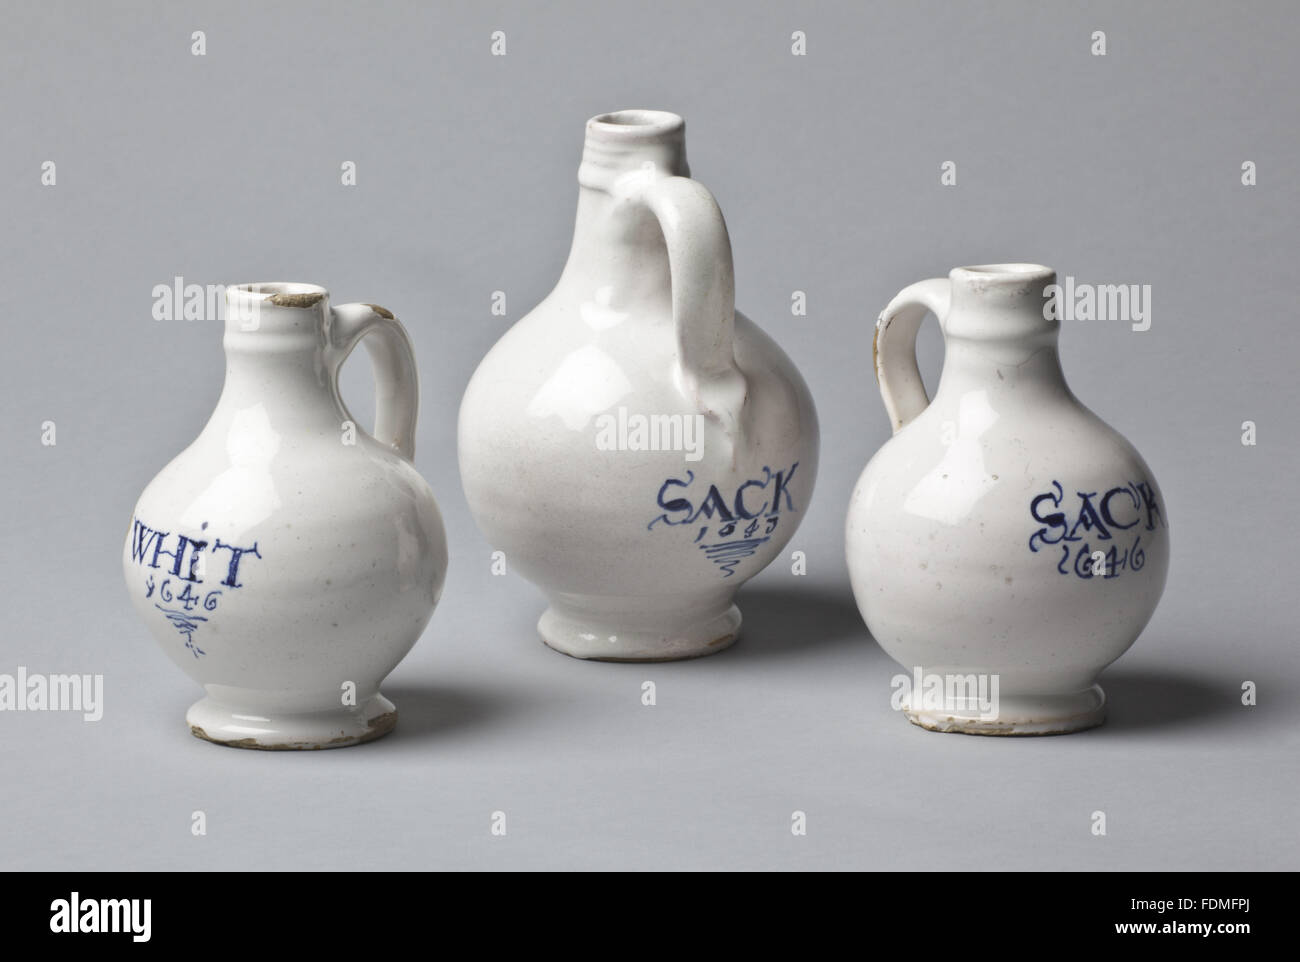 Seventeenth century sherry jugs inscribed 'SACK 1643'. A set of three English tin glazed earthenware wine bottles/jugs, with bulbous bodies and staright necks at Cotehele, Cornwall. Stock Photo